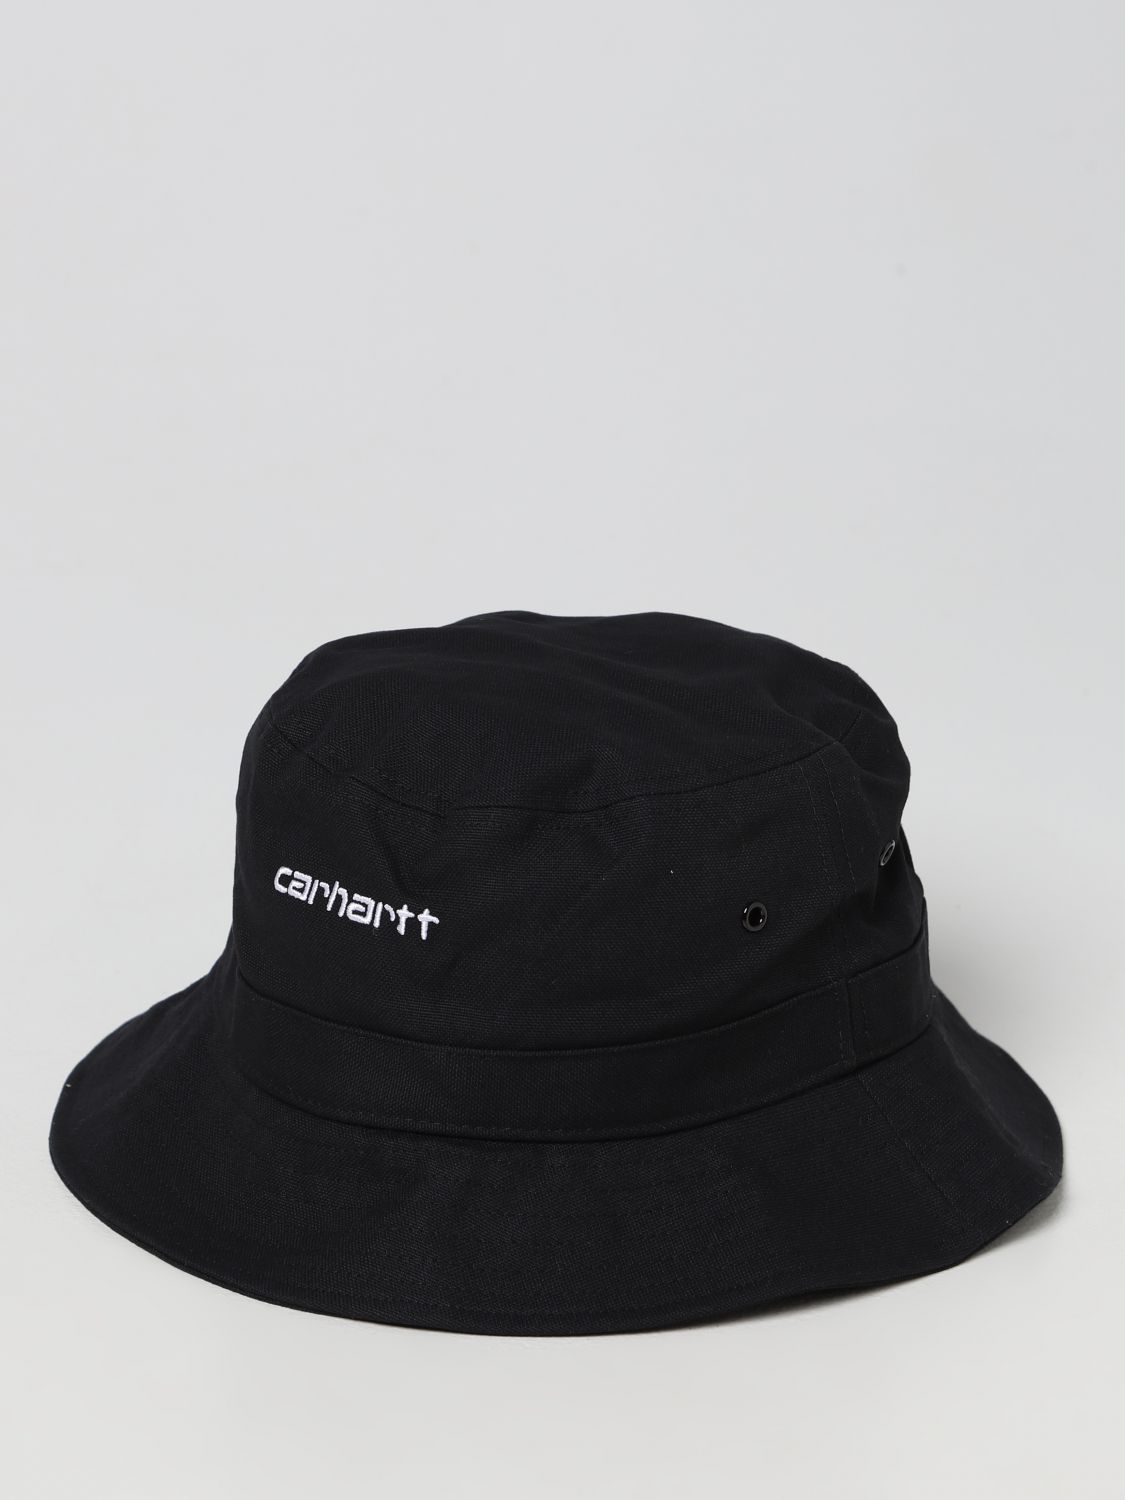 Save 61% Carhartt WIP Synthetic Hat in Black for Men Mens Hats Carhartt WIP Hats 